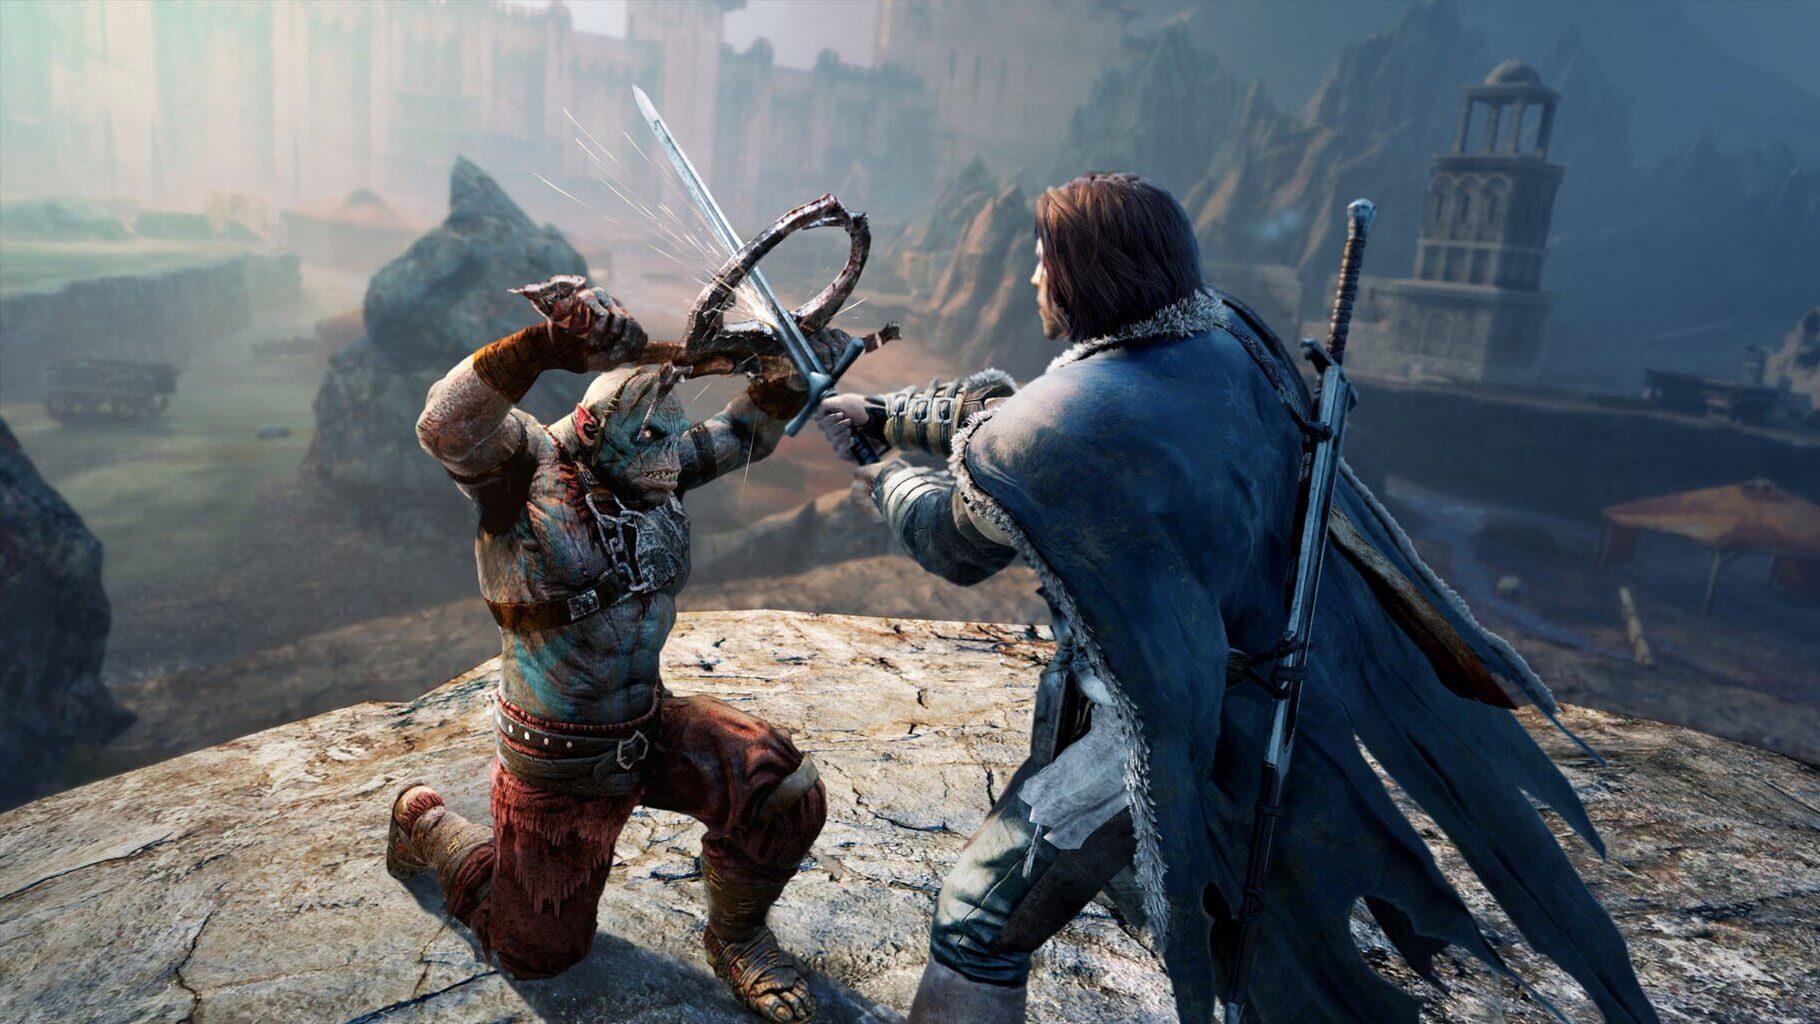 Captura de pantalla - Middle-earth: Shadow of Mordor - Lord of the Hunt